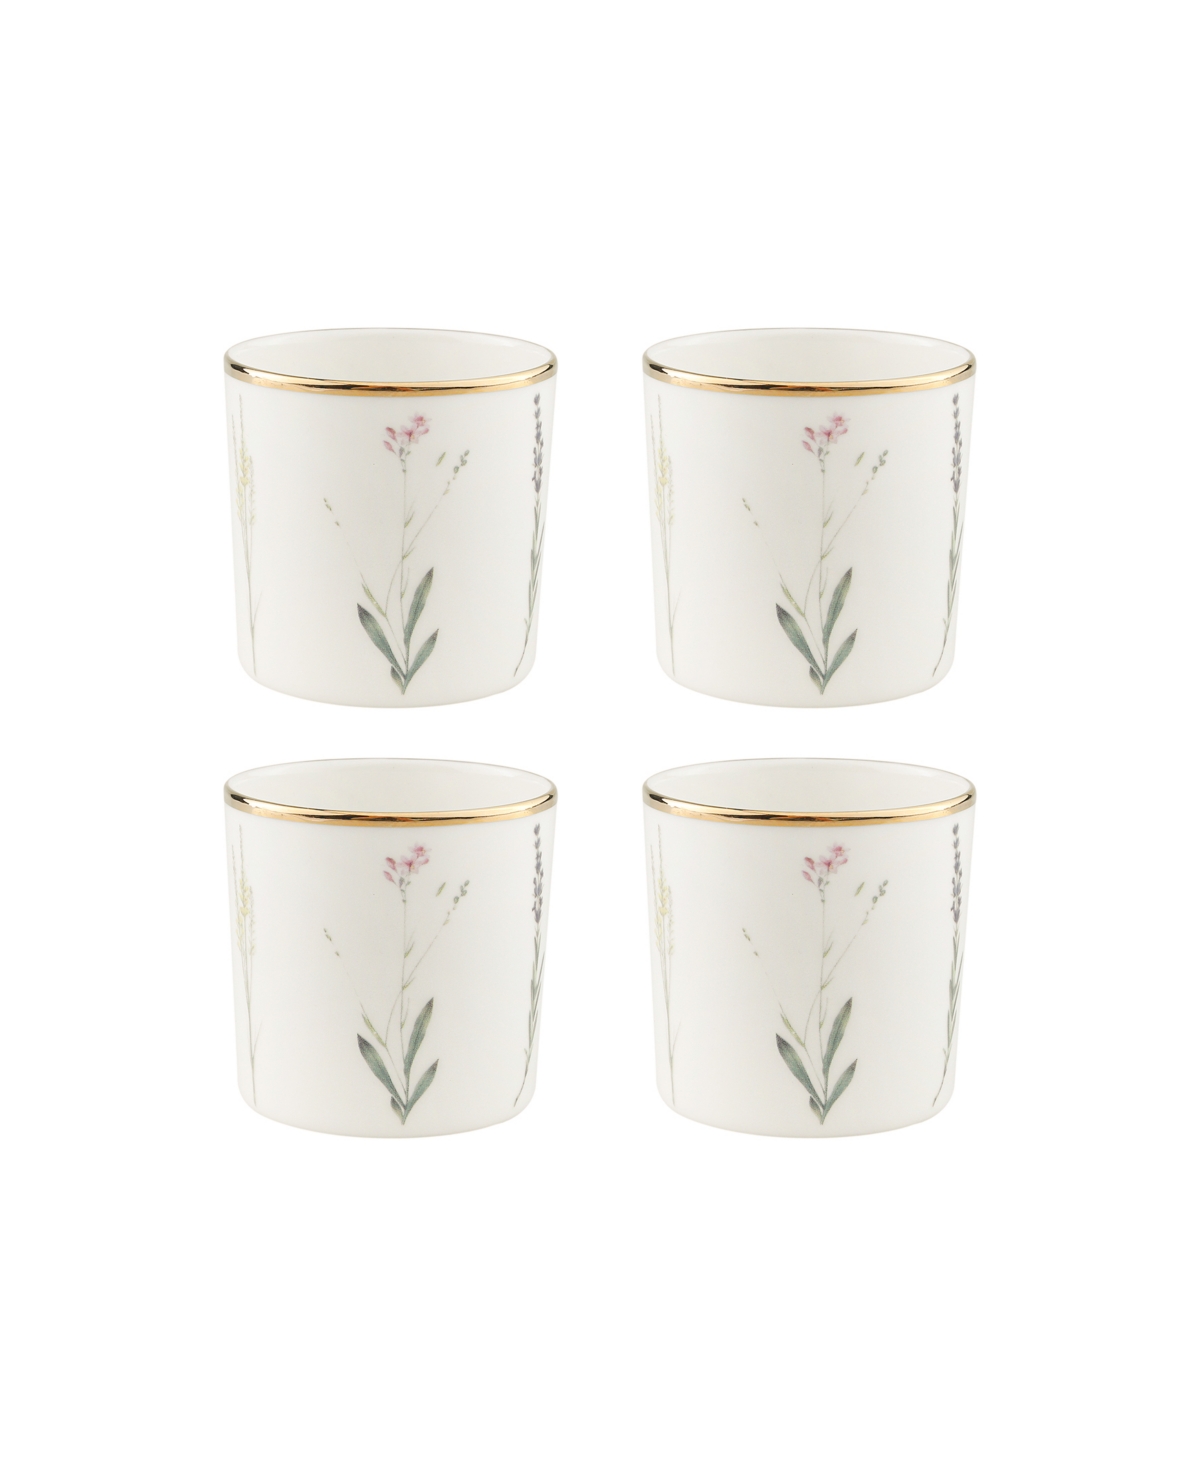 Botanical 4 Piece Cup Set, Service for 2 - White, Gold